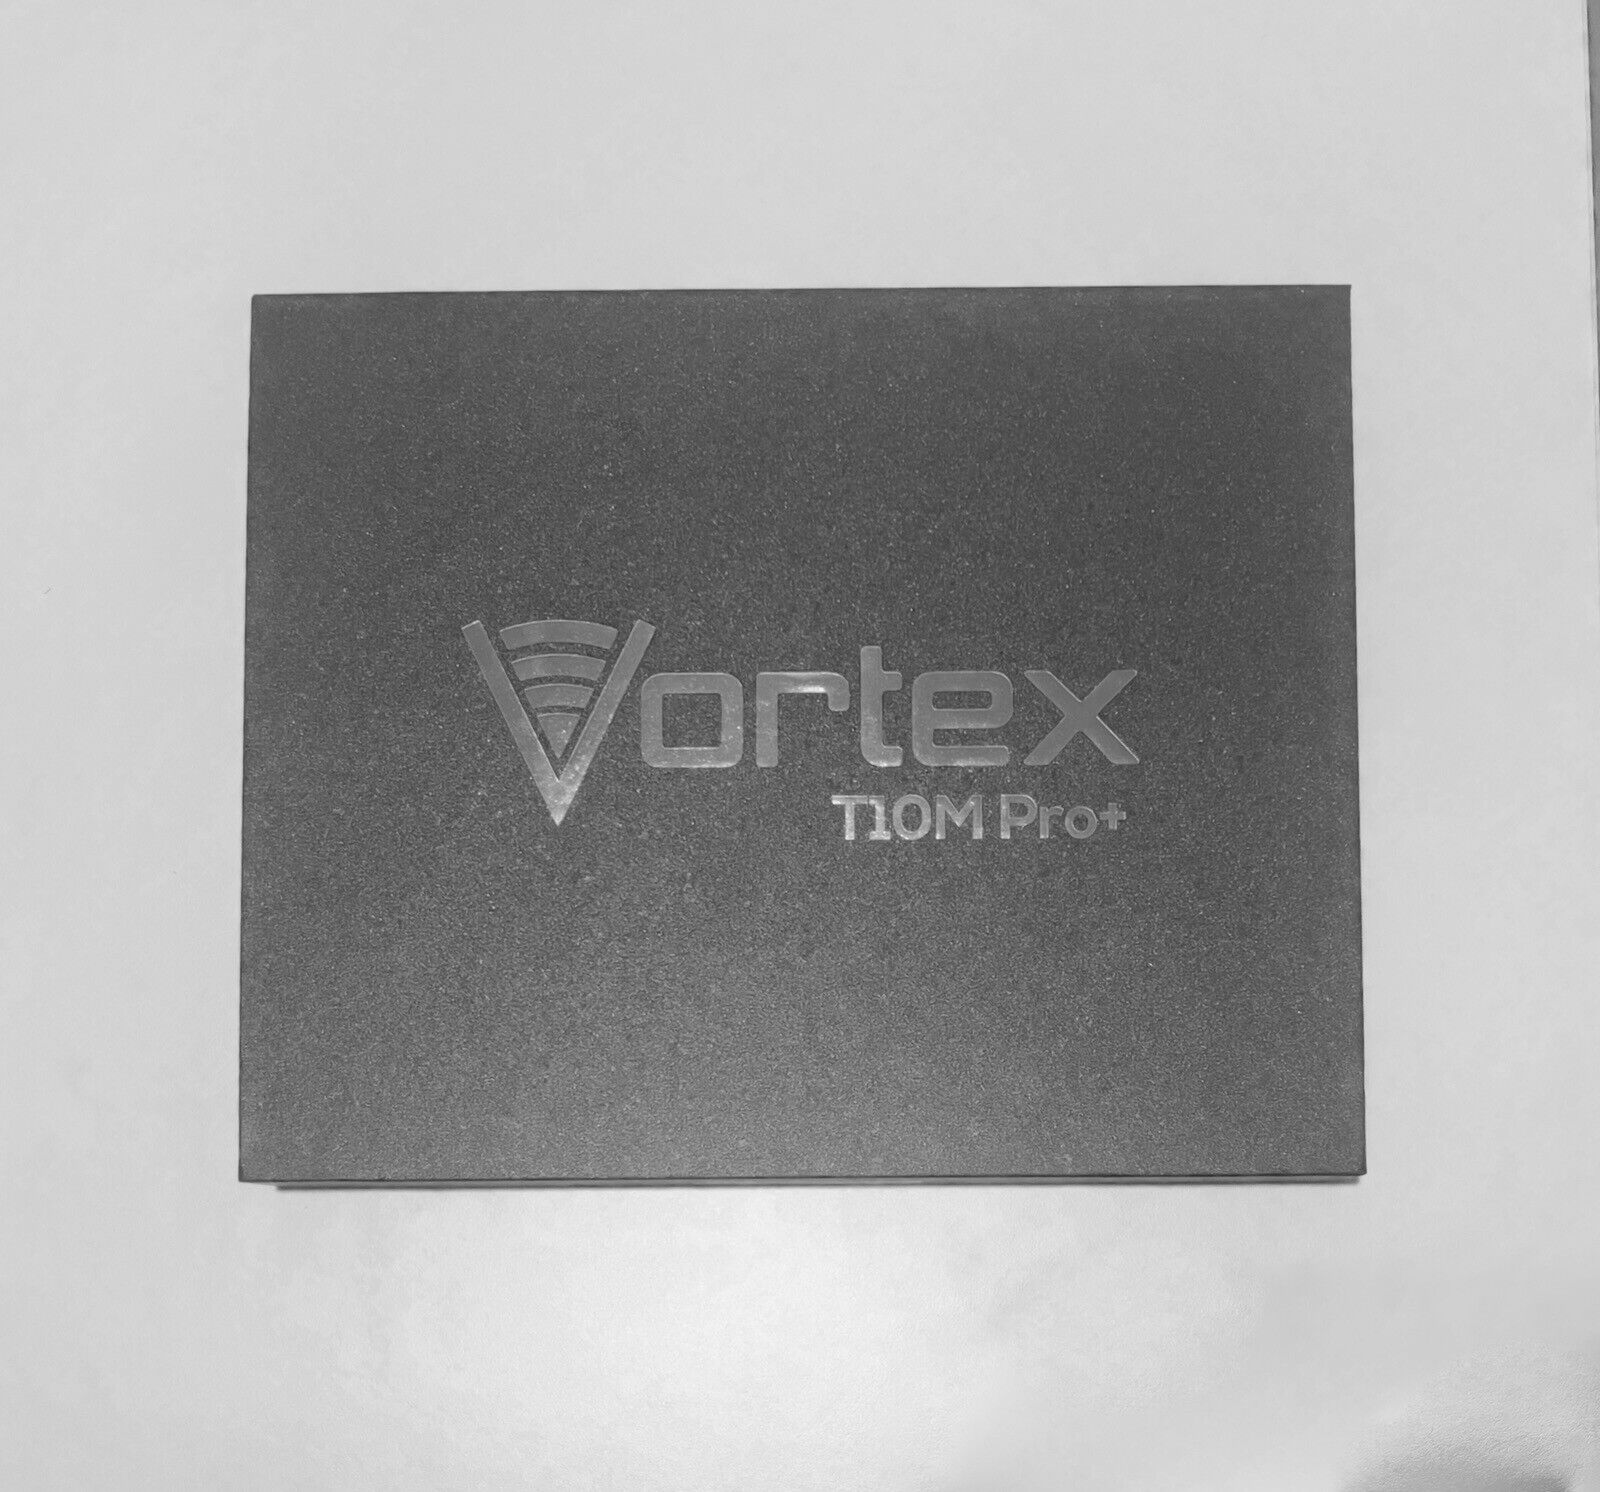 Vortex T10M Pro Tablet Android WiFi+4G LTE Cellular